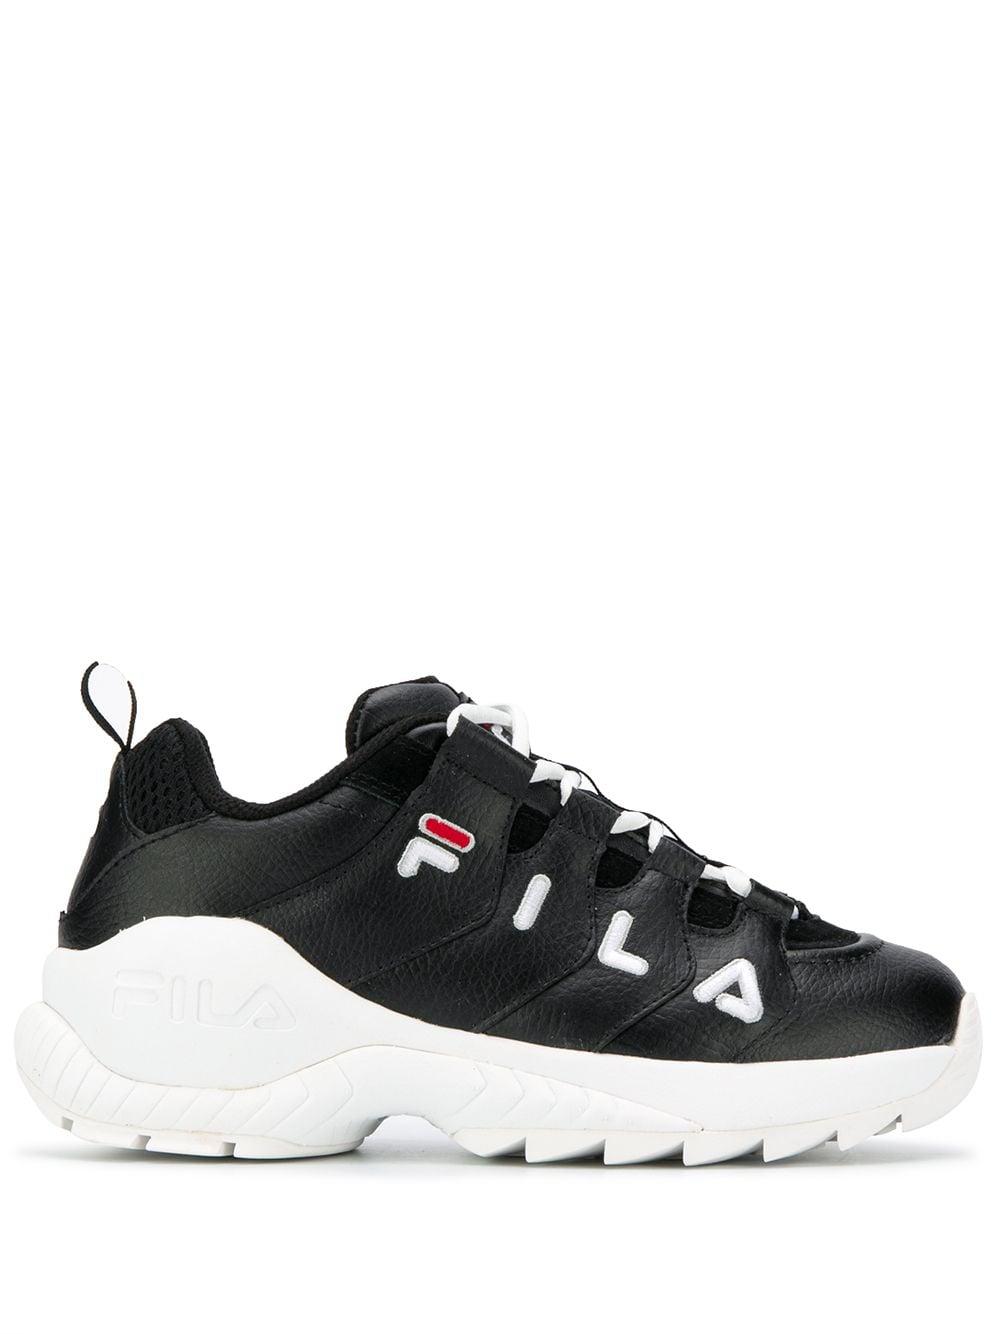 Fila Leather Disruptor Chunky Sneakers in Black - Lyst